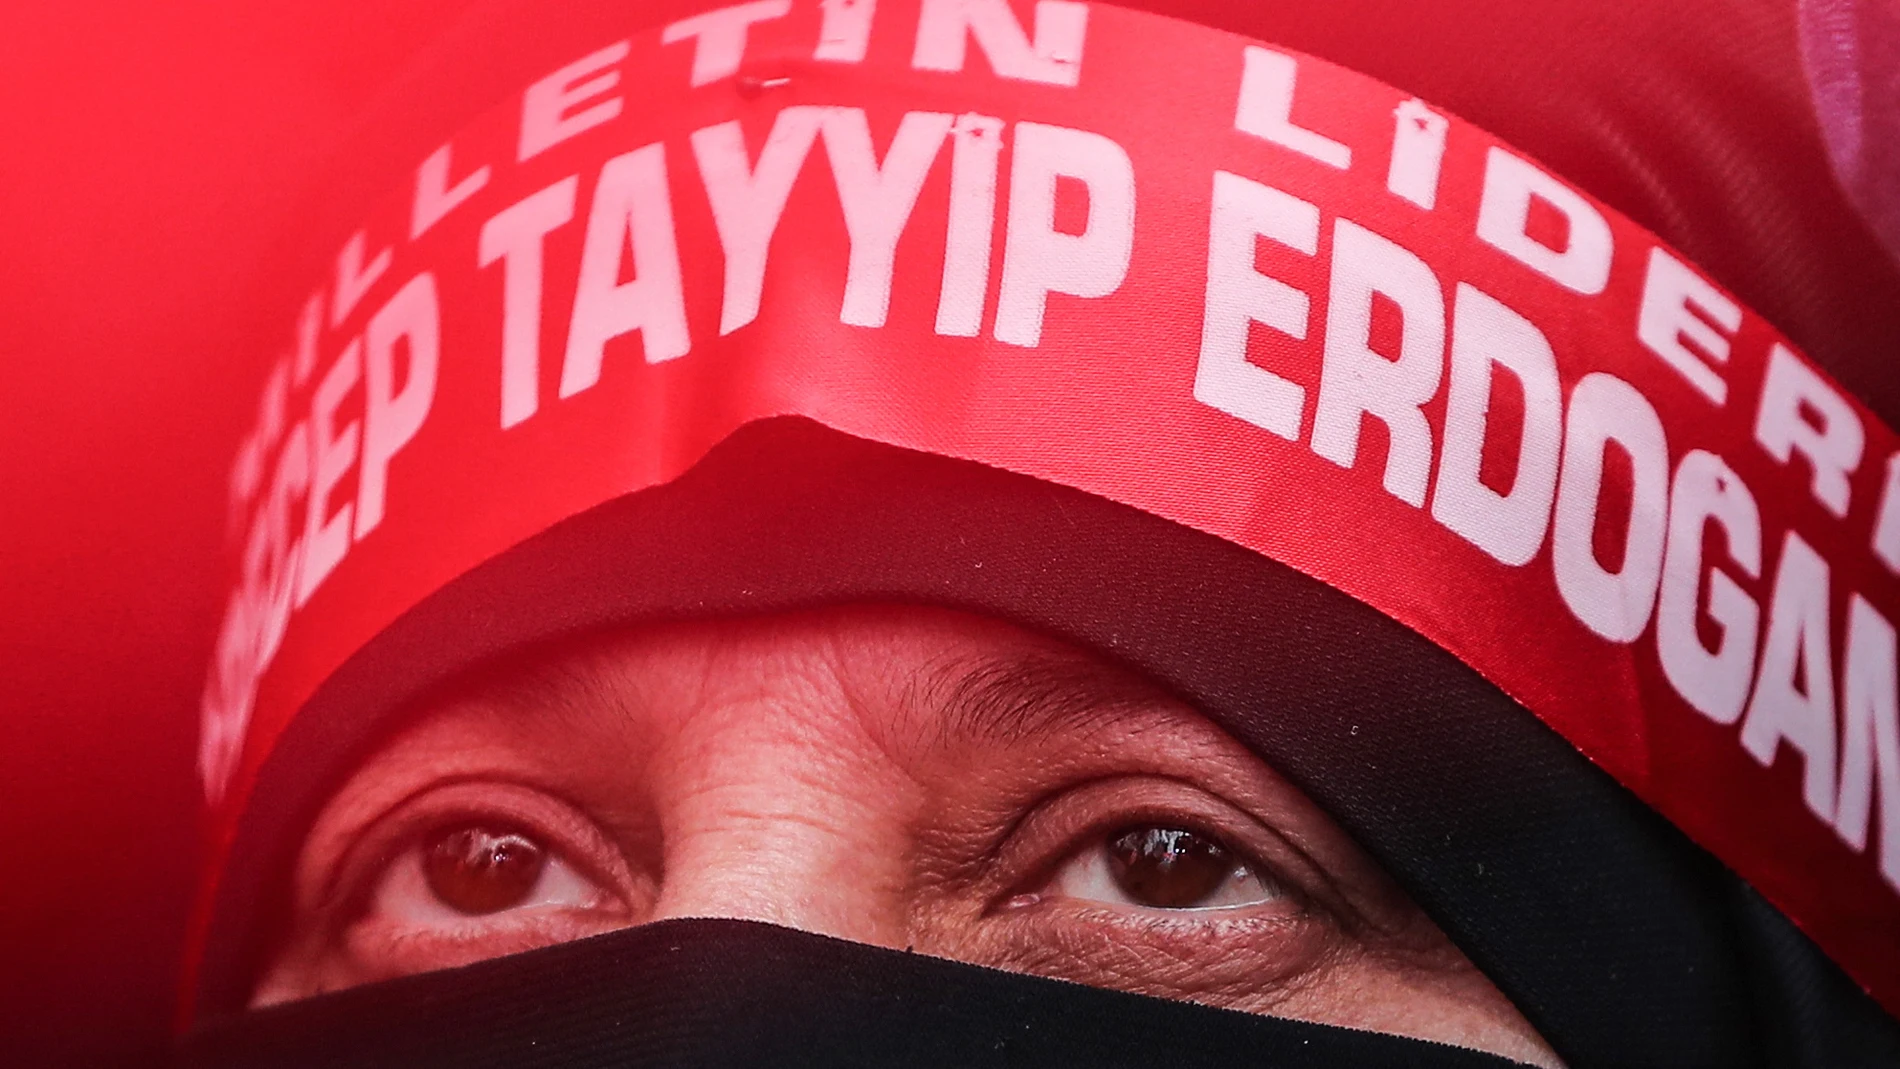 Istanbul (Turkey), 12/05/2023.- A supporter of Turkish President Recep Tayyip Erdogan attends his election campaign event in Istanbul, Turkey, 12 May 2023. Turkey will hold its general election on 14 May 2023 with a two-round system to elect its president, while parliamentary elections will be held simultaneously. (Elecciones, Turquía, Estanbul) EFE/EPA/ERDEM SAHIN